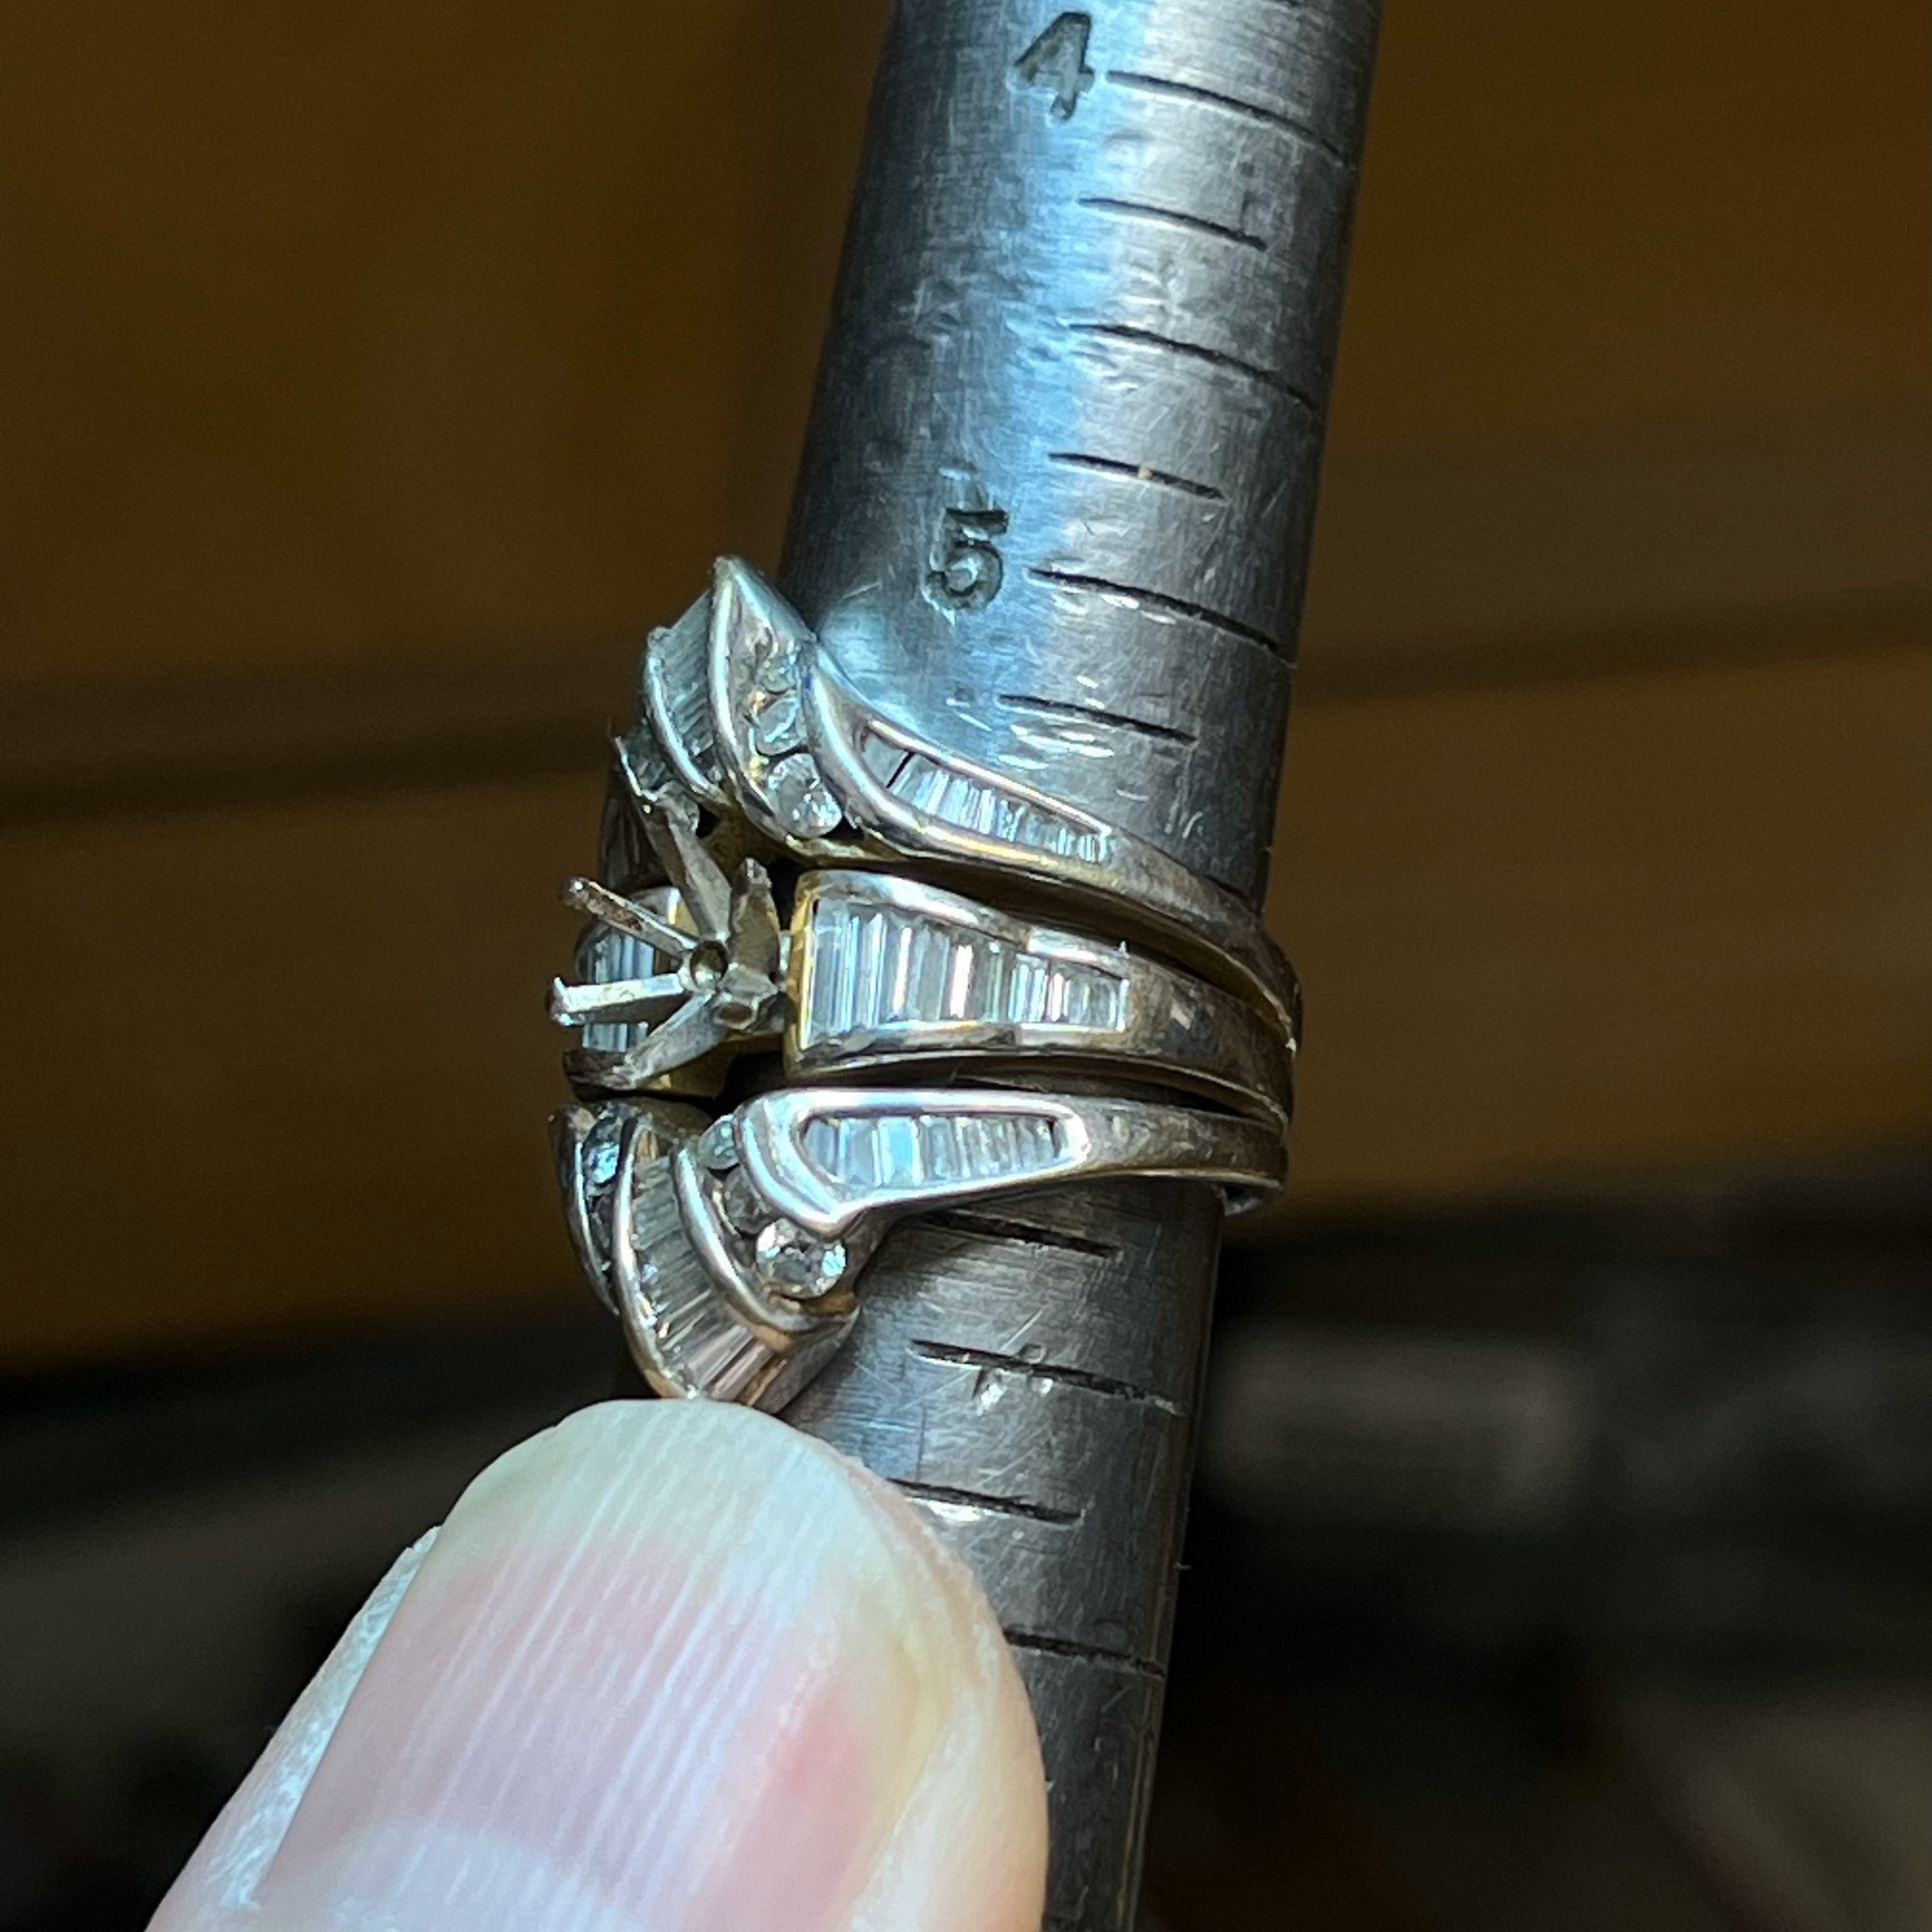 A close up of a ring being sized as a service.